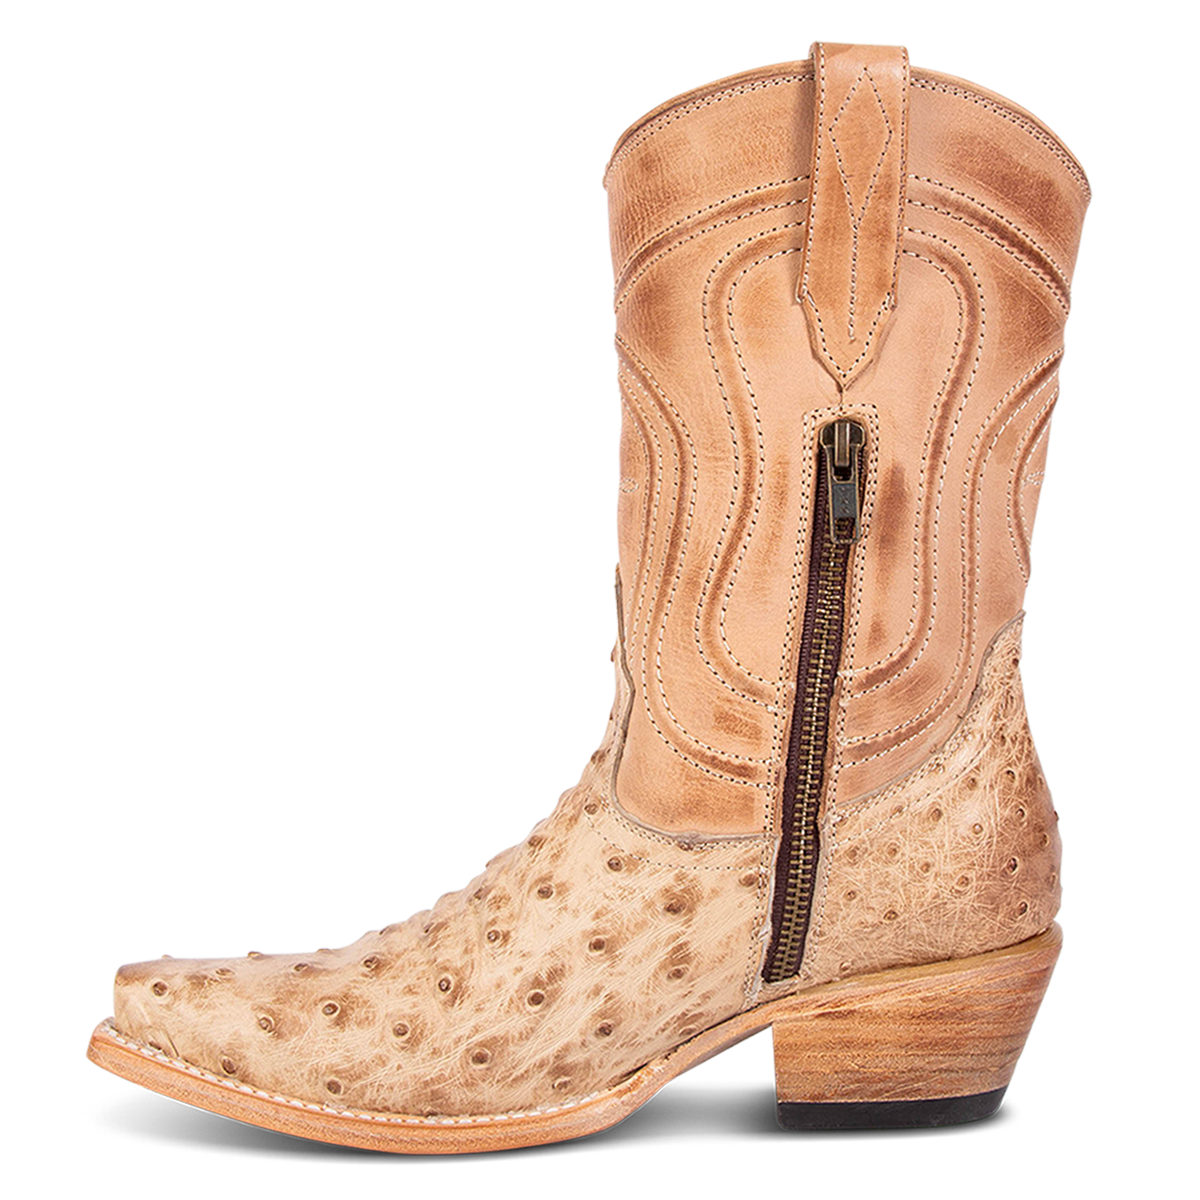 Inside view showing zip closure on FREEBIRD women's Weston beige ostrich multi exotic leather mid calf cowgirl mid calf boot